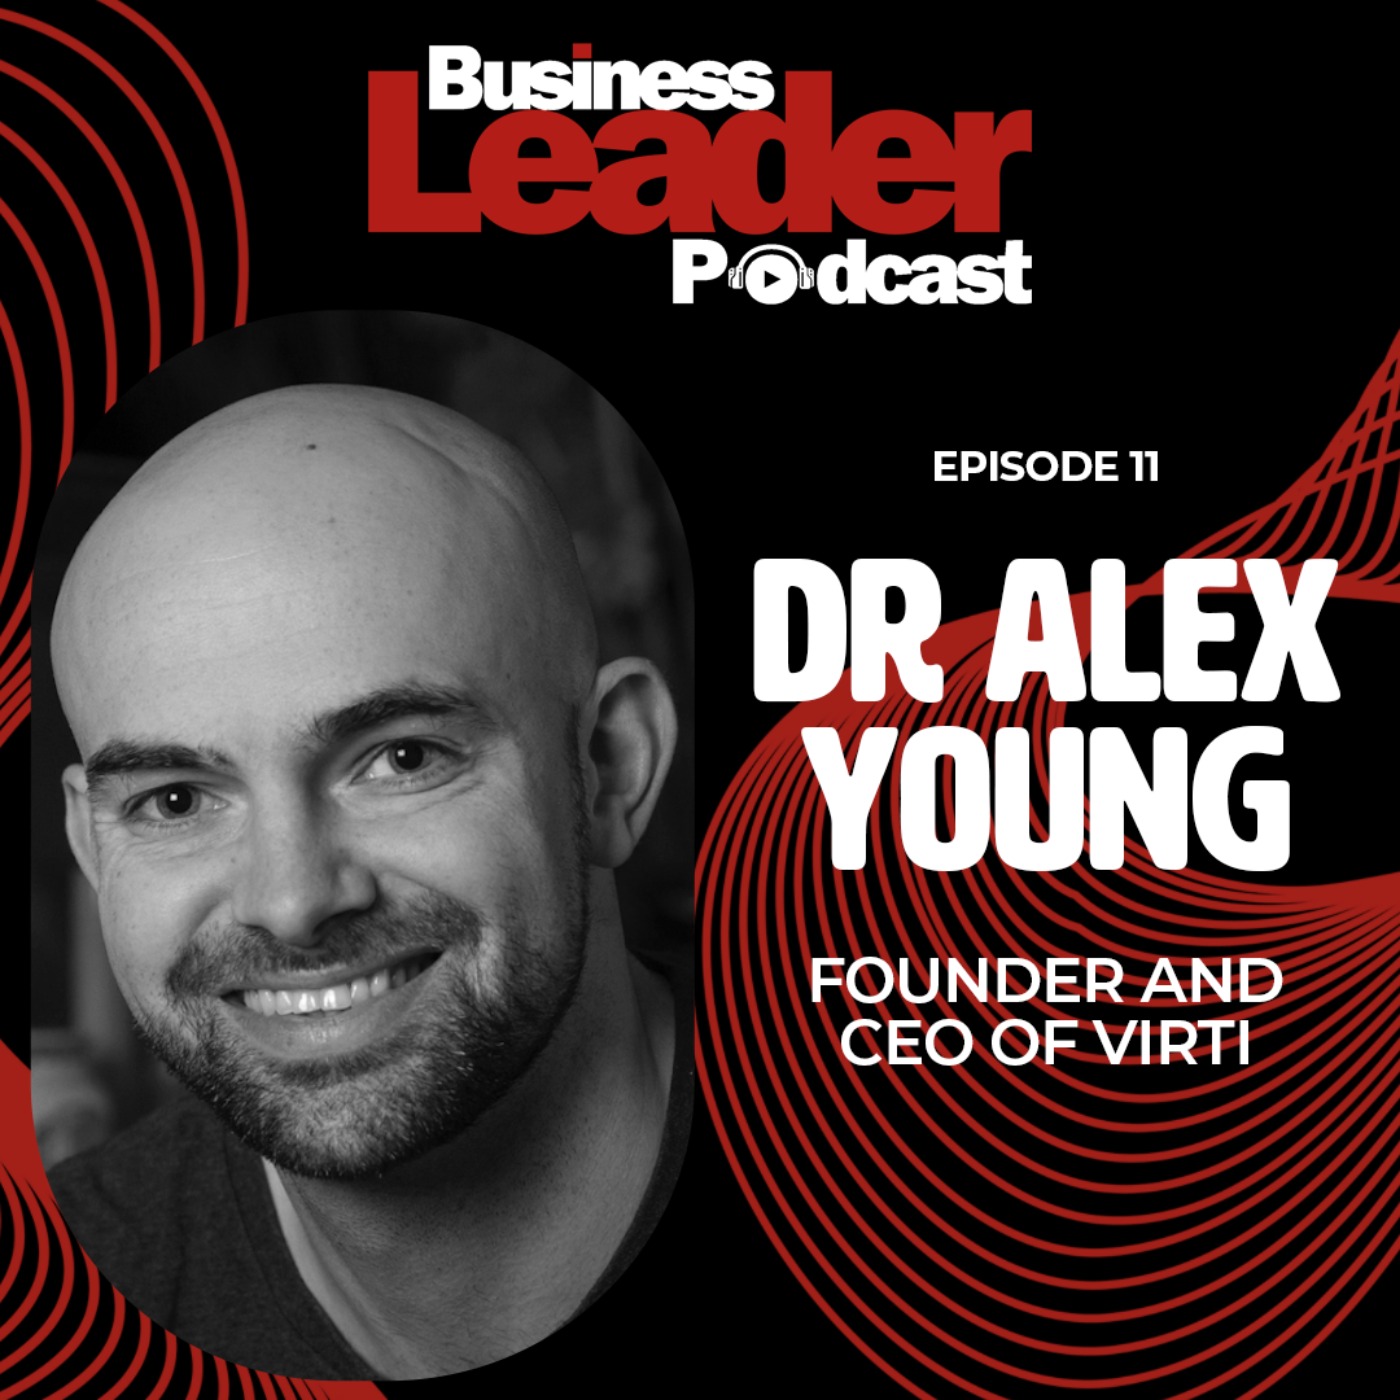 Dr Alex Young: founder and CEO of Virti